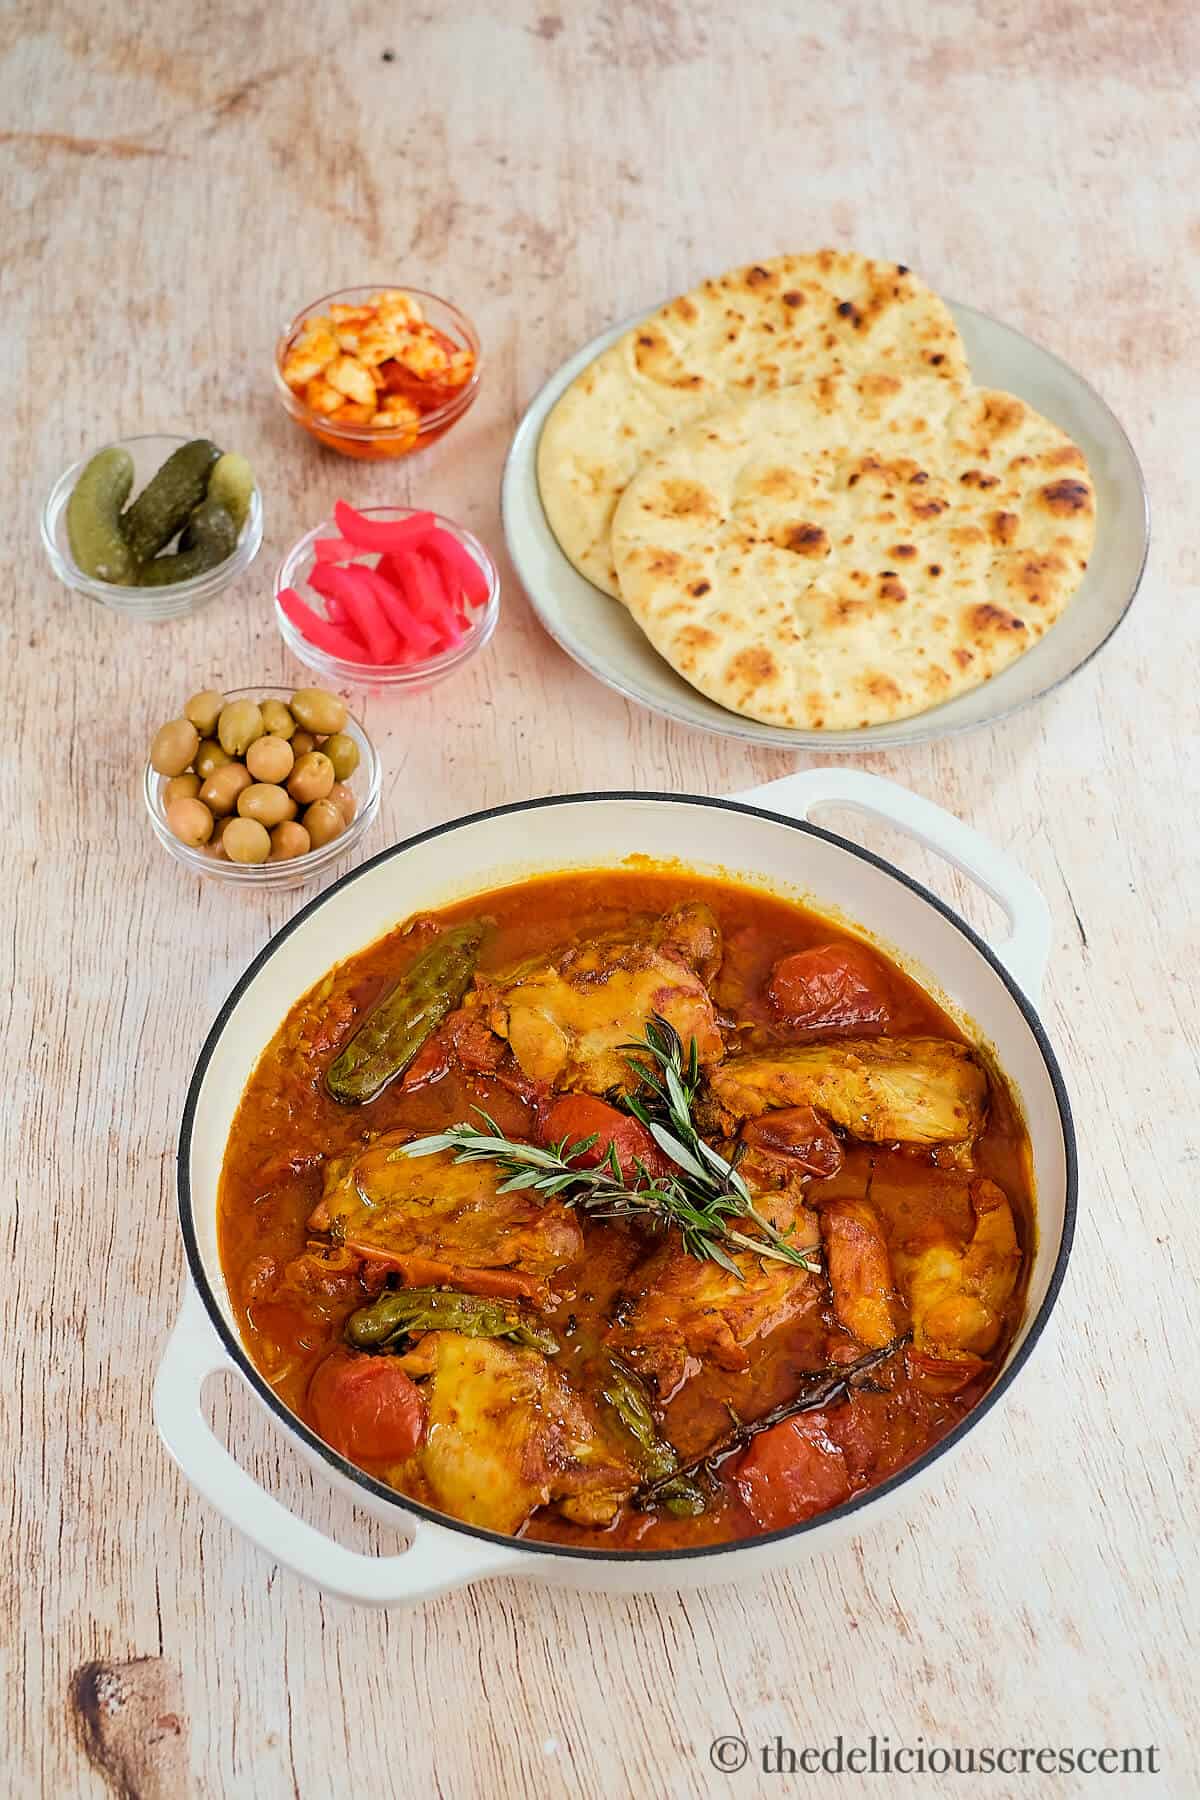 Tomato chicken cooked with rosemary and served on the table with bread.